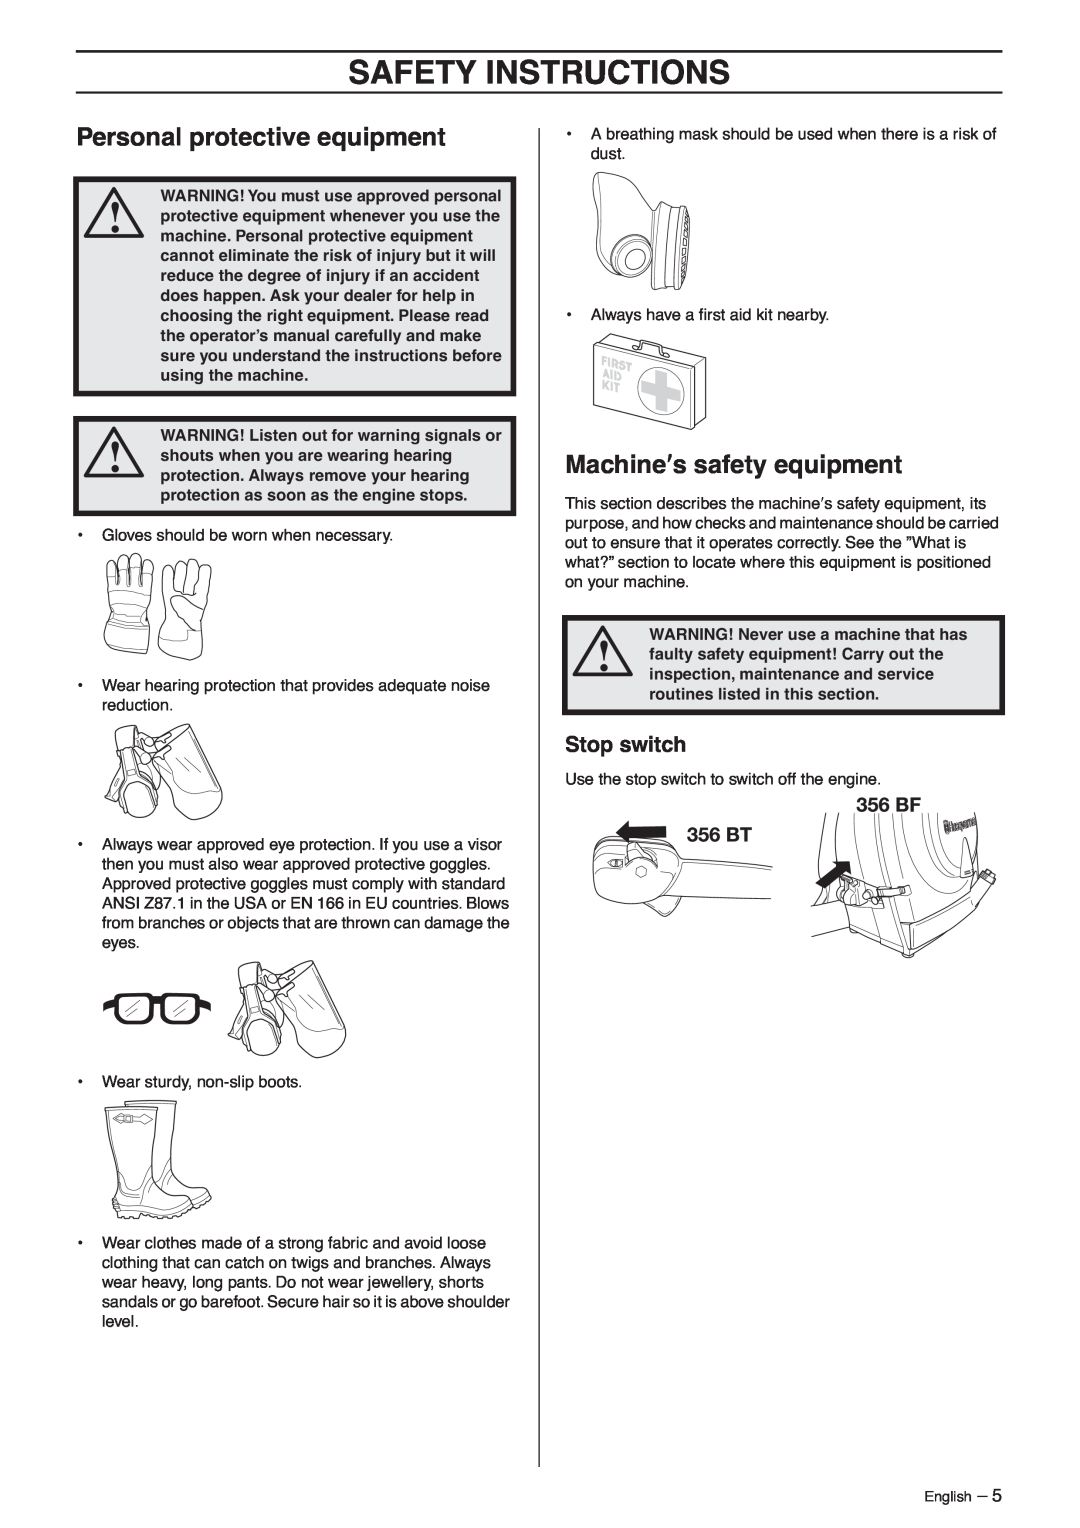 Husqvarna 356 BT X-series Safety Instructions, Personal protective equipment, Machine′s safety equipment, Stop switch 